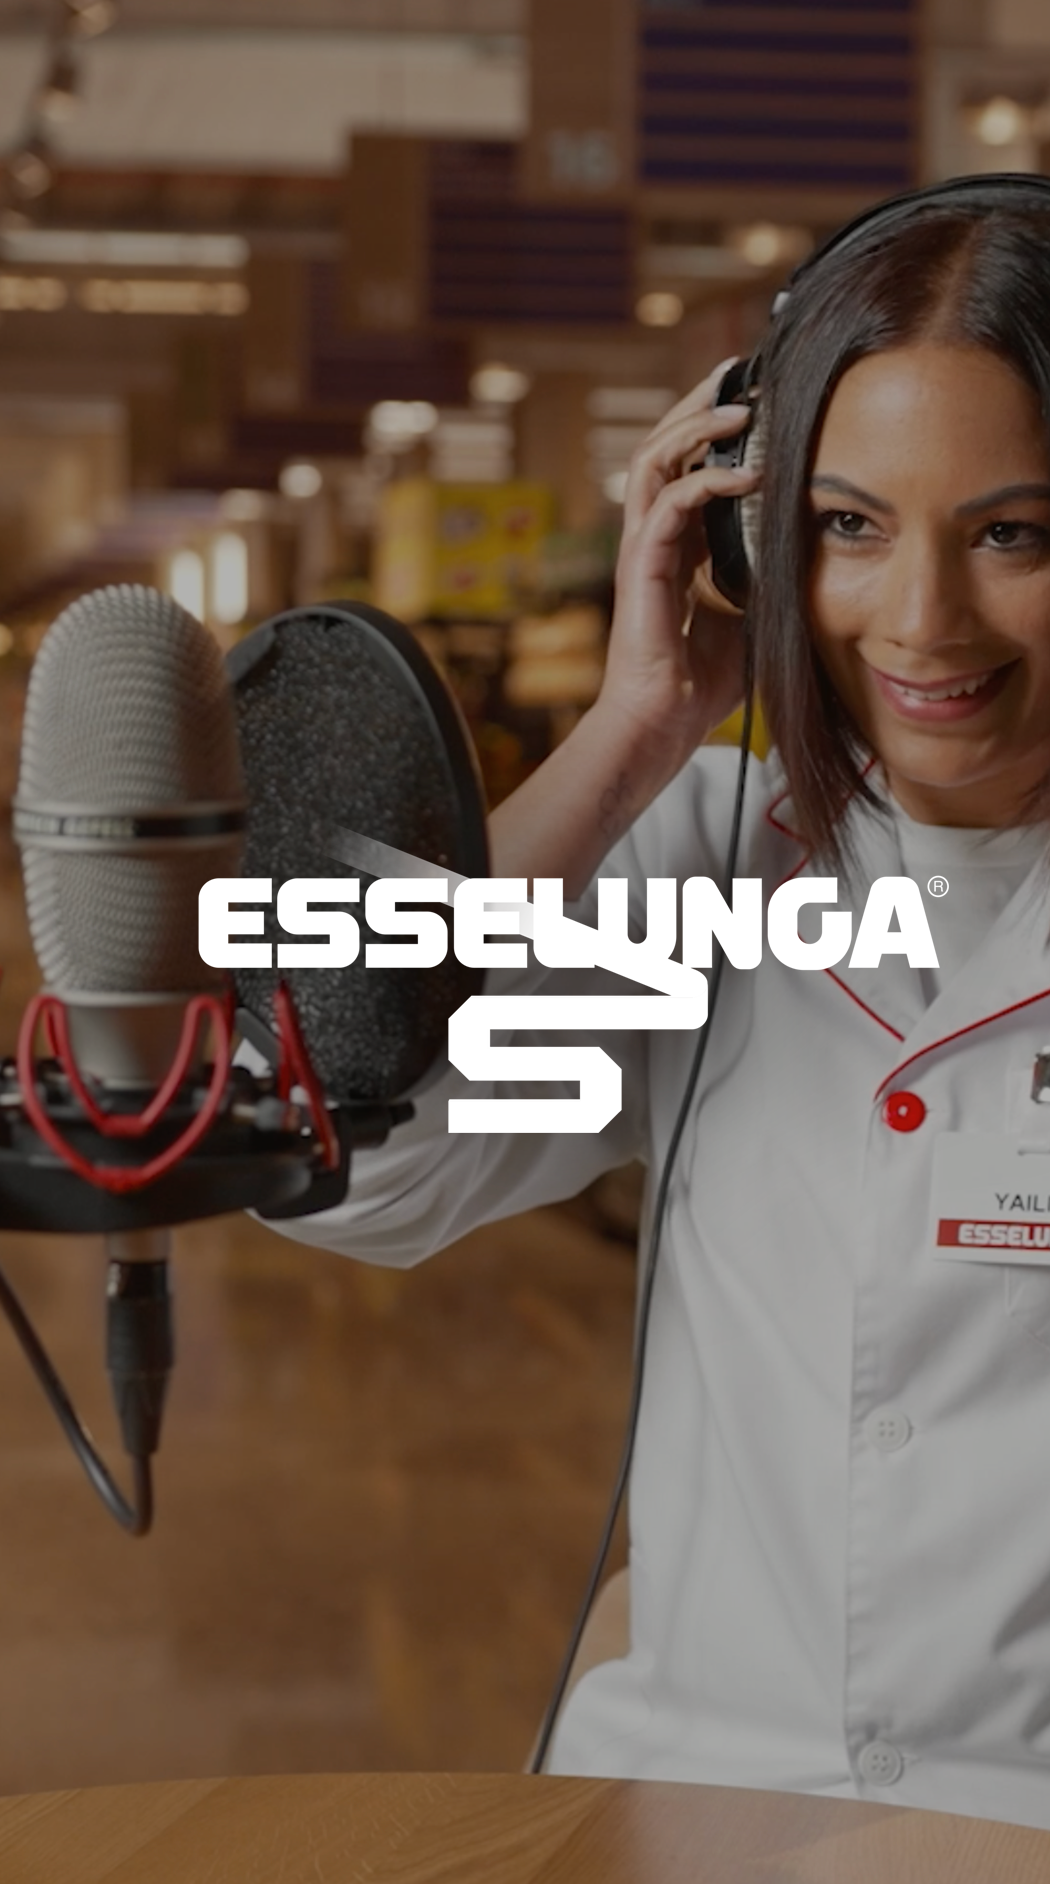 video production for esselunga